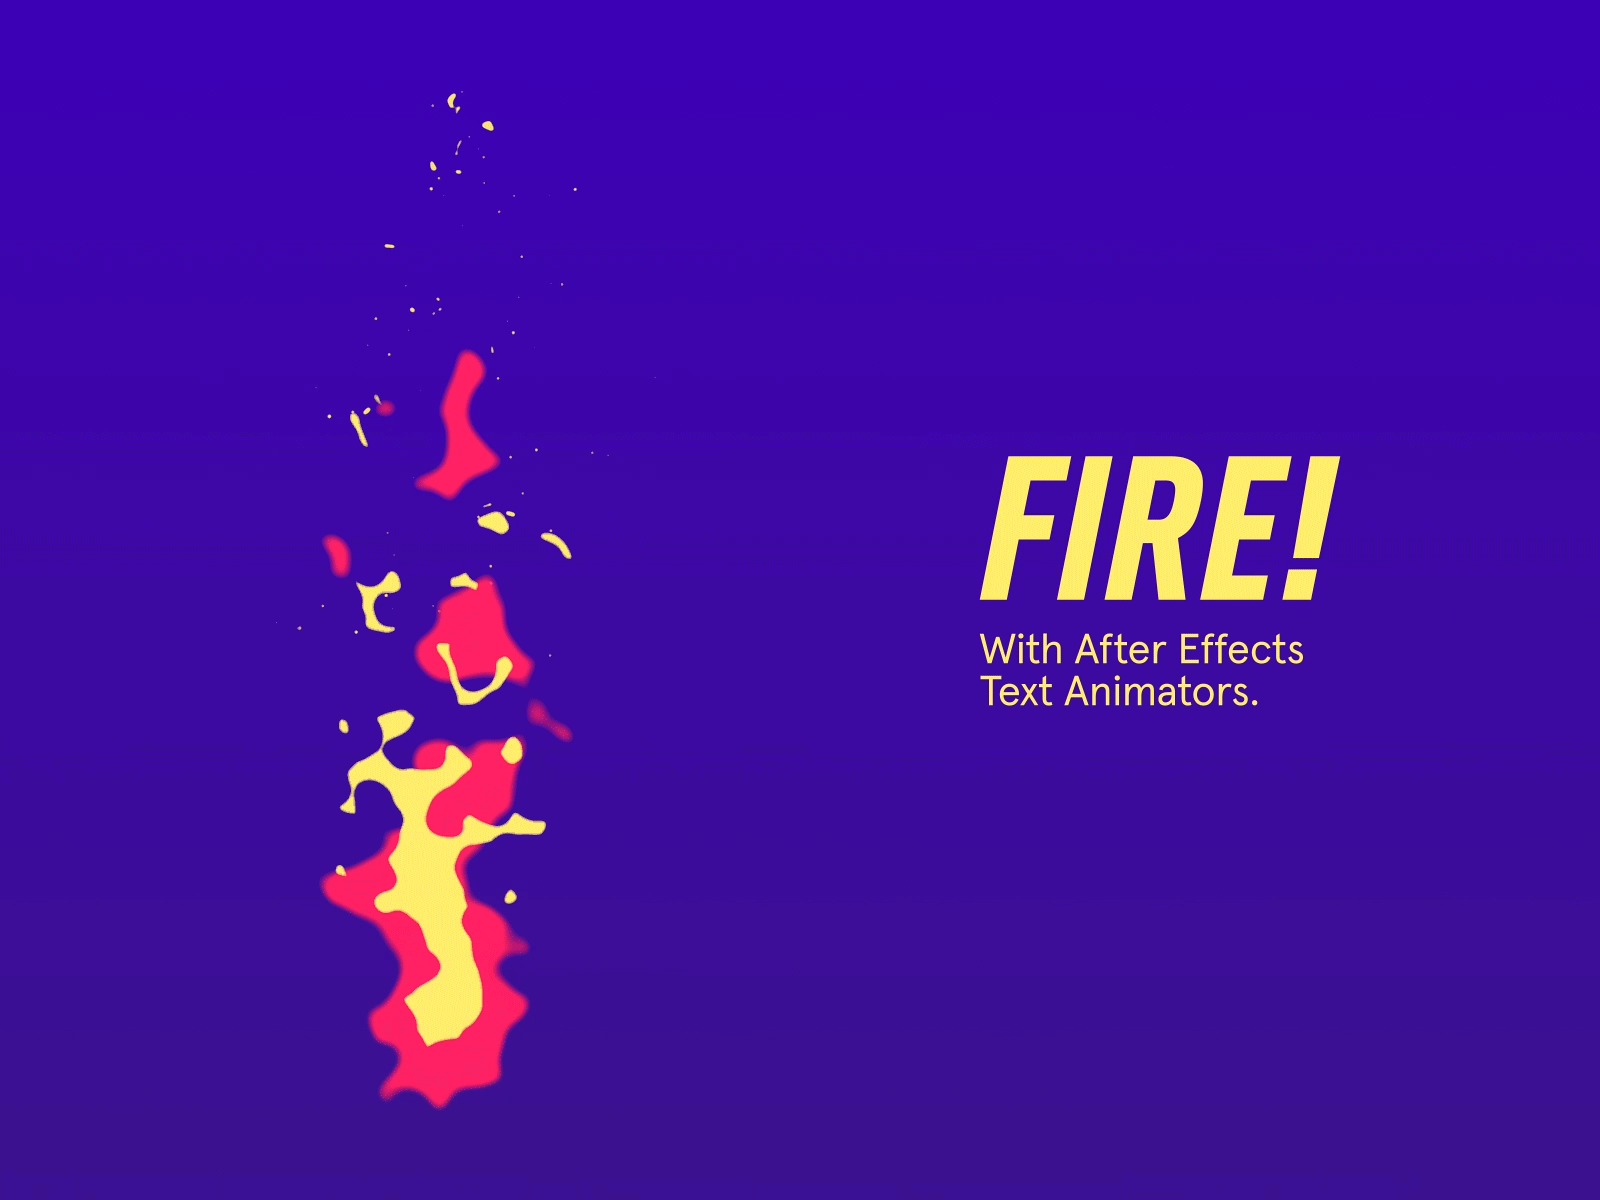 Fire! Using After Effects Text Animators